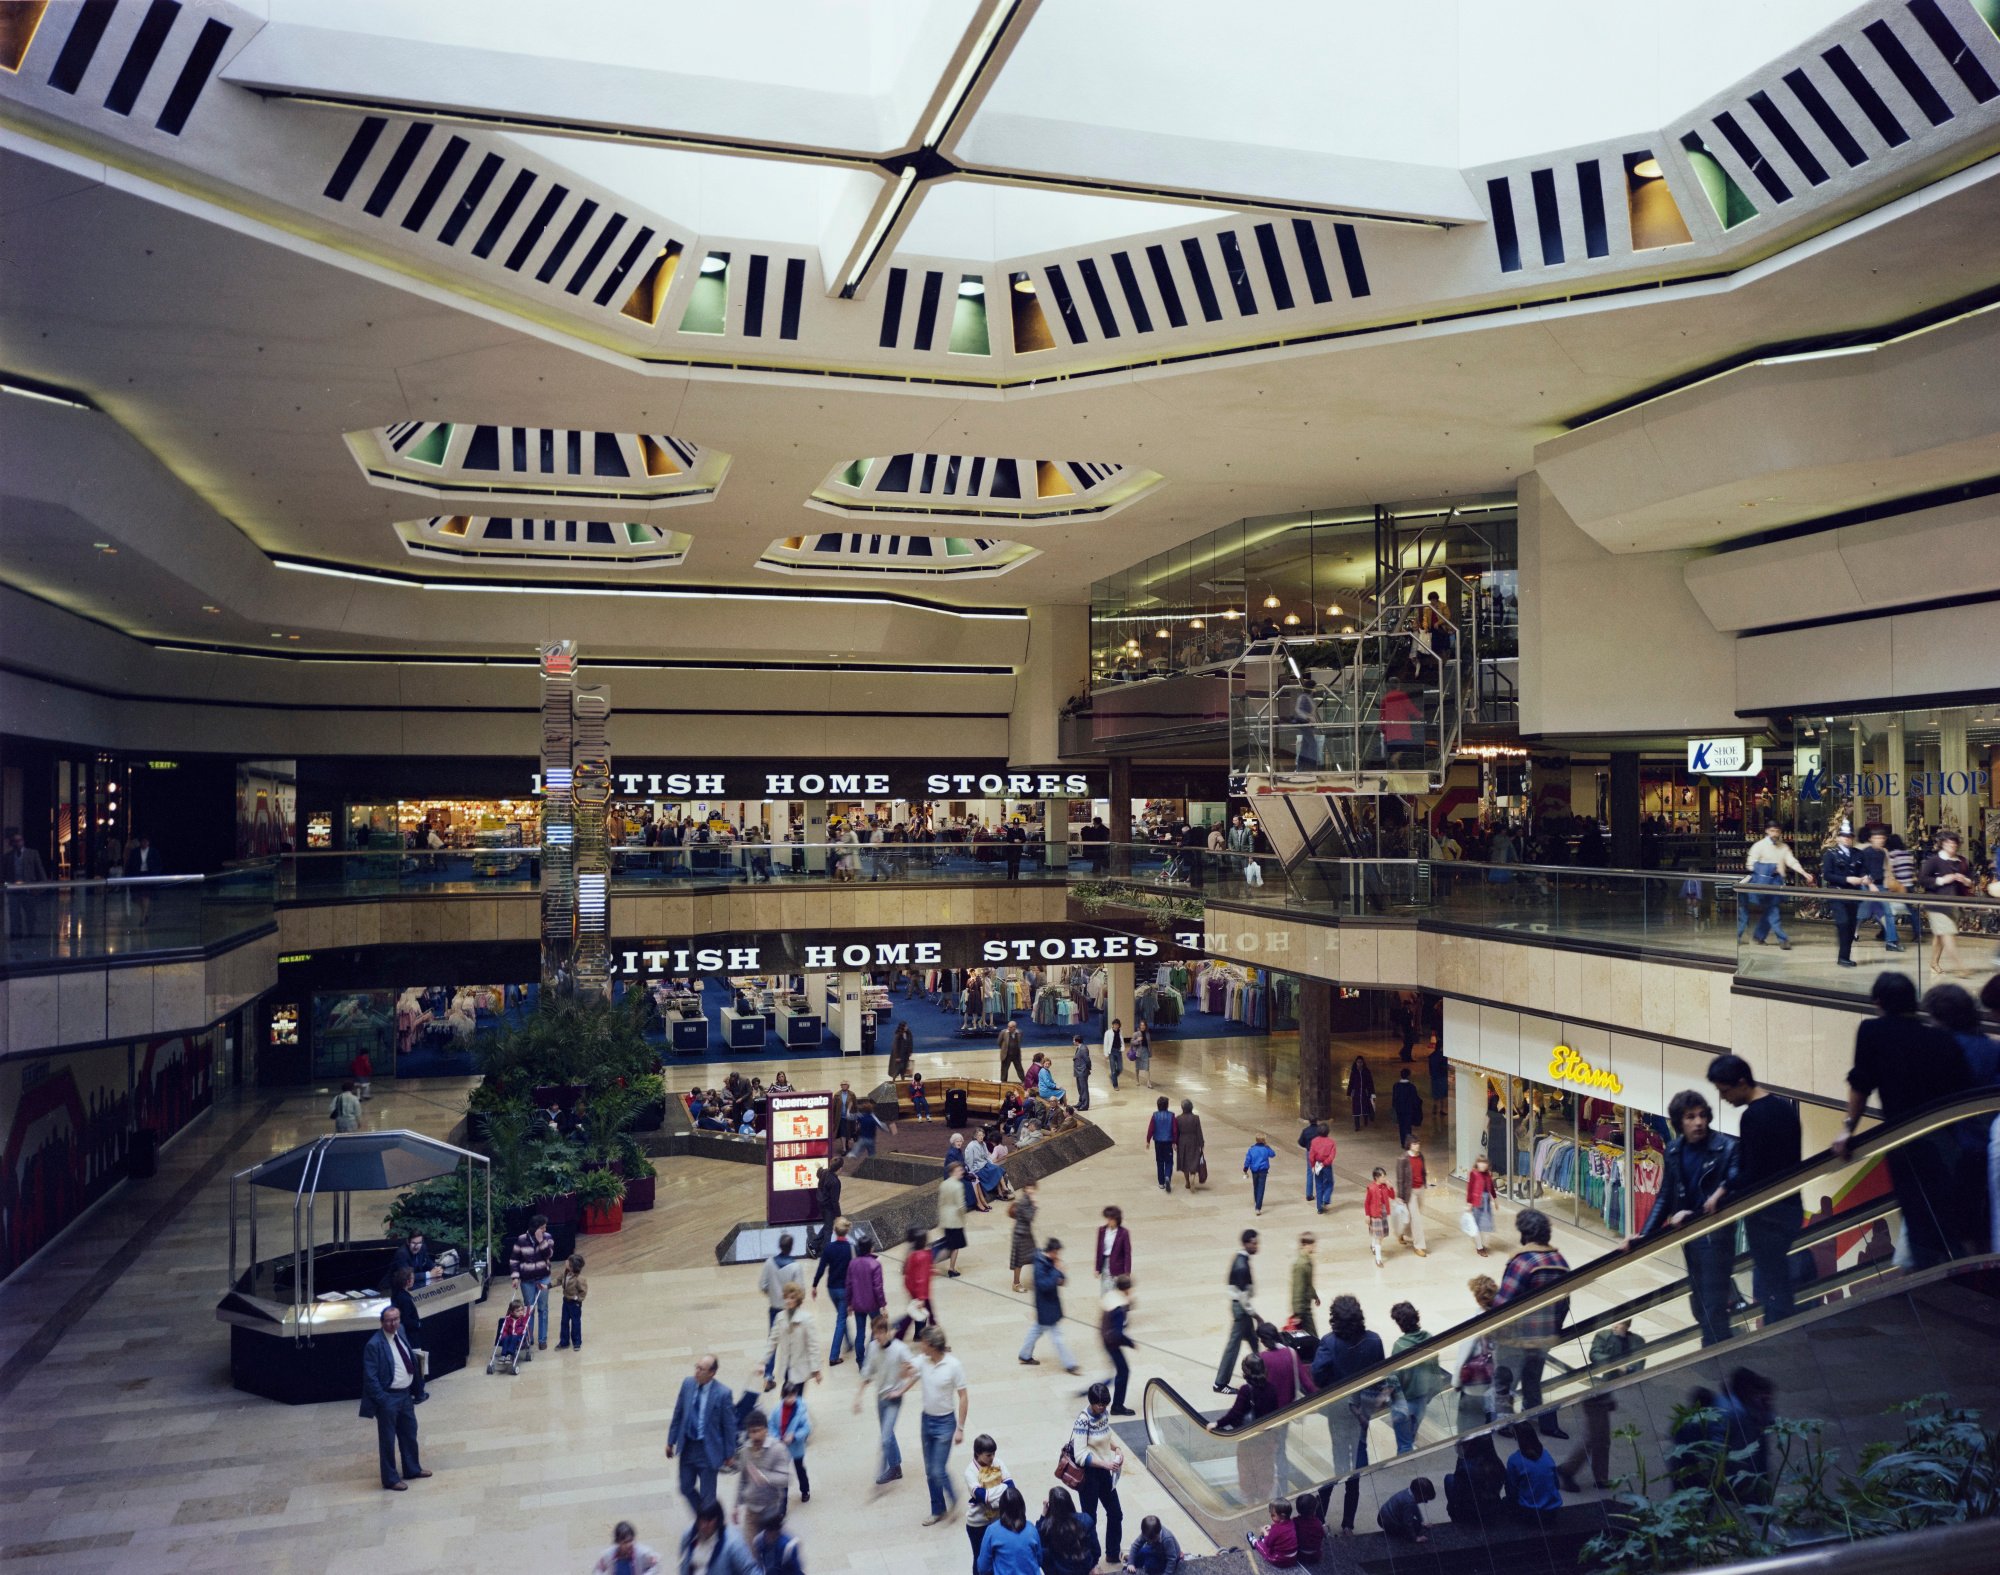 Colour photograph showing shoppers inside Queensgate shopping centre. The two levels of British Home Stores are in the background. On the right, shoppers are riding down an escalator into a large central square.